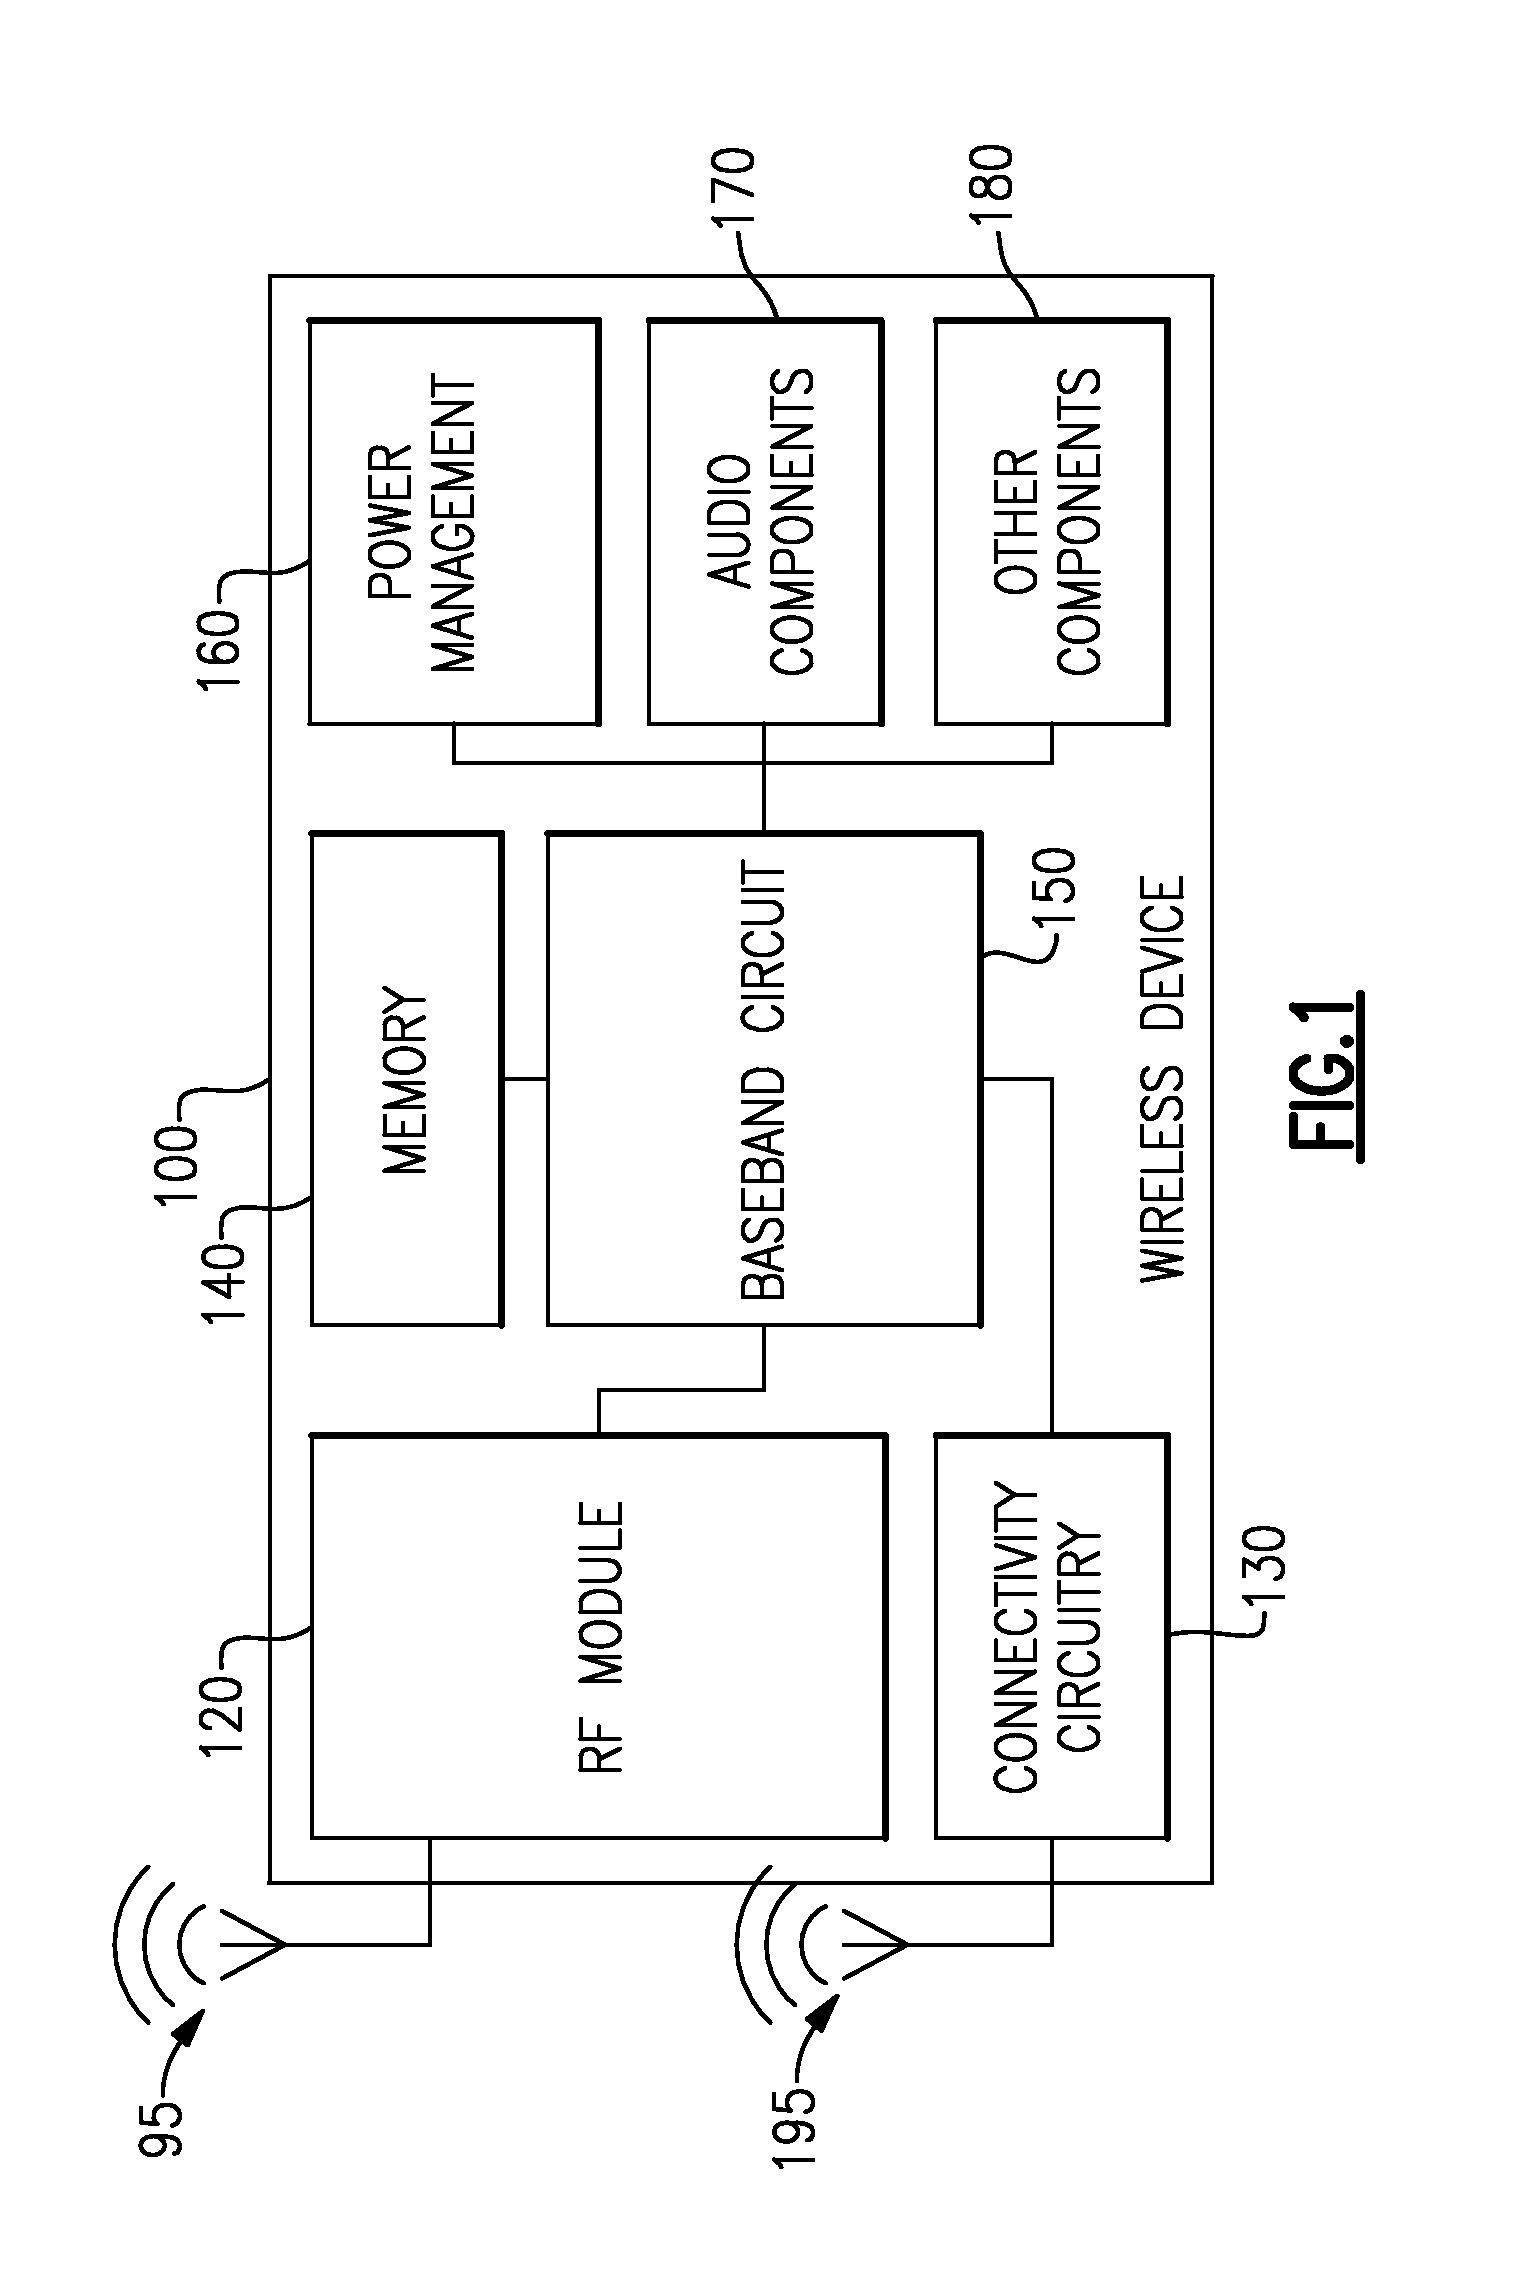 Semiconductor substrate having high and low-resistivity portions